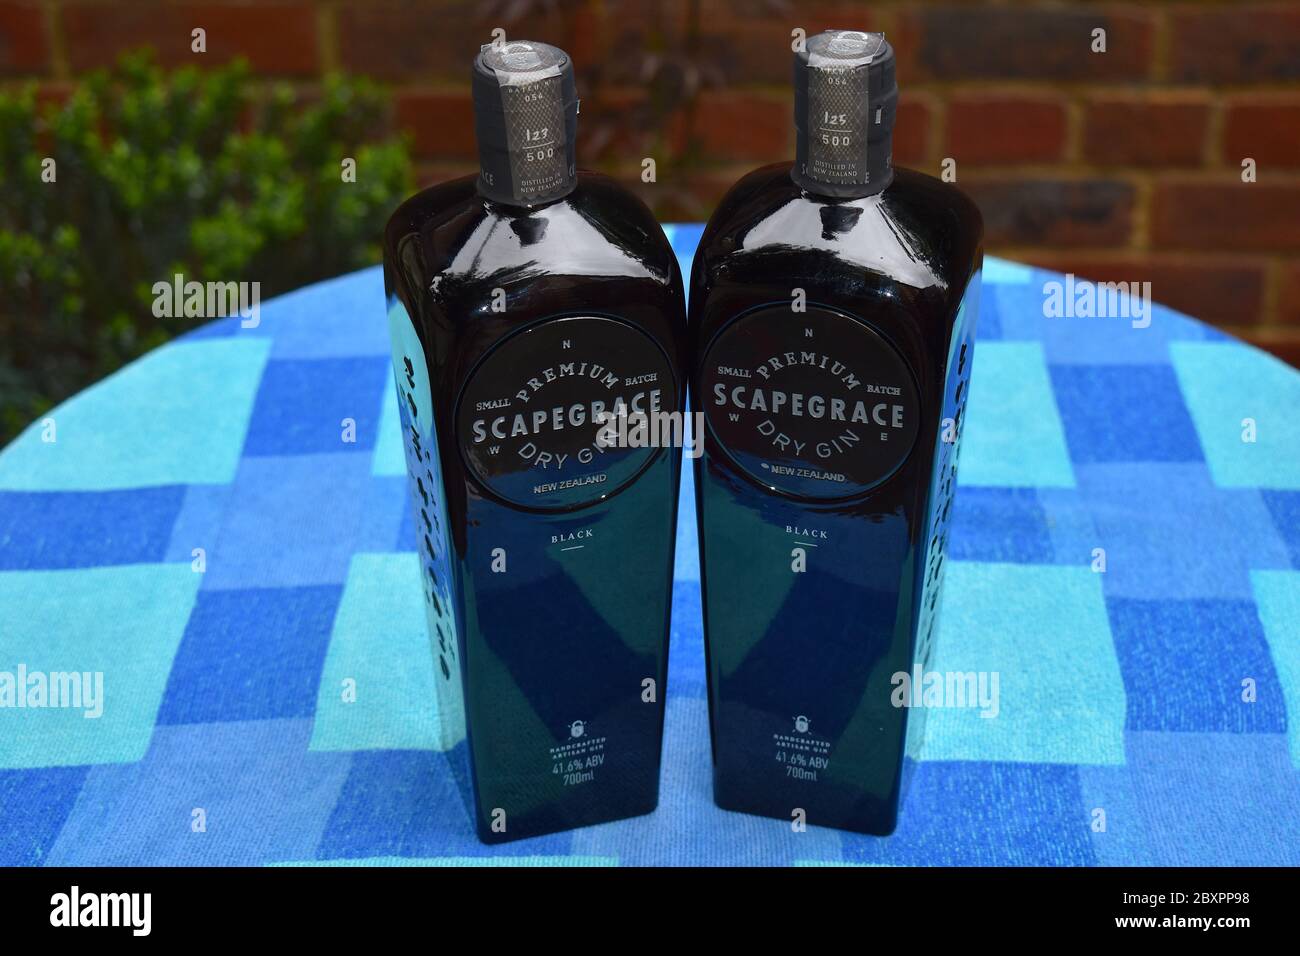 Scapegrace luxurious full bodied gin with candied sweet potato and pineapple finish It changes colour from black to purple when mixed with Tonic water Stock Photo